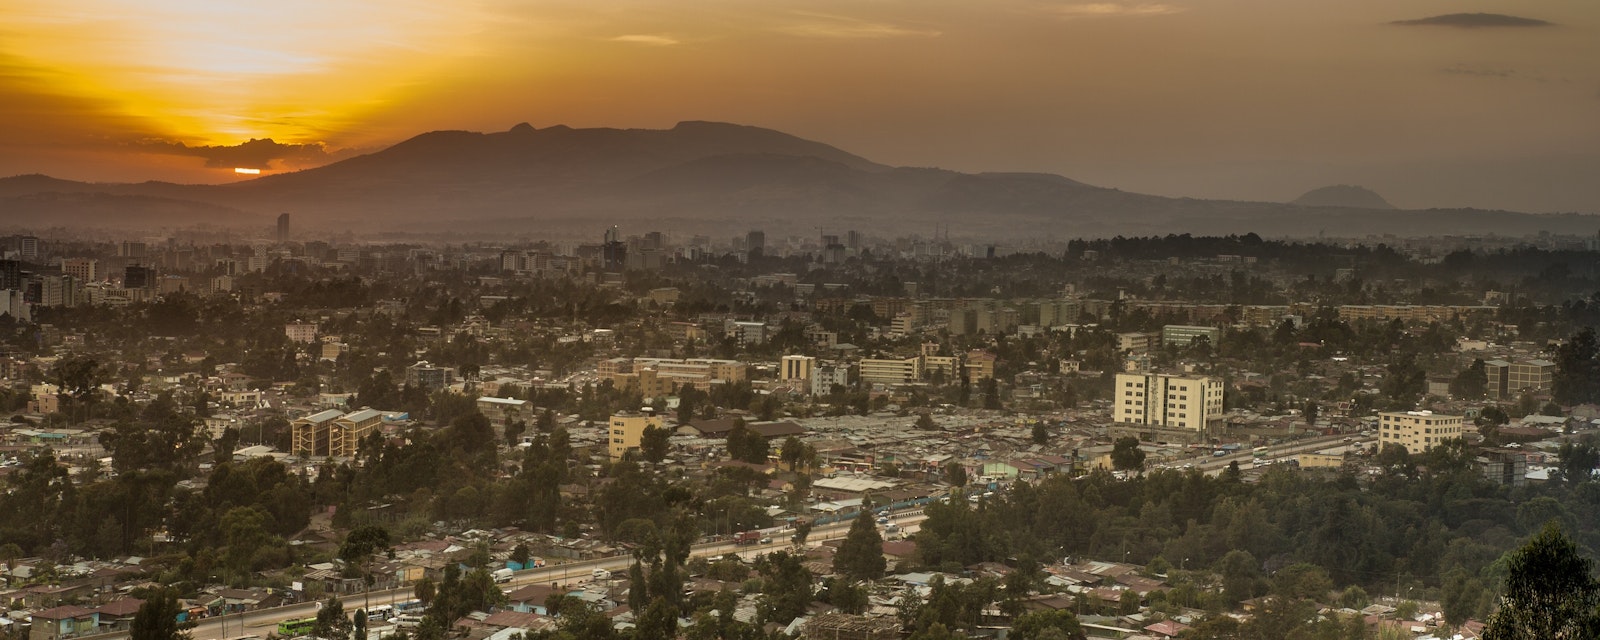 Aerial,View,Of,The,City,Of,Addis,Ababa,During,Sunset